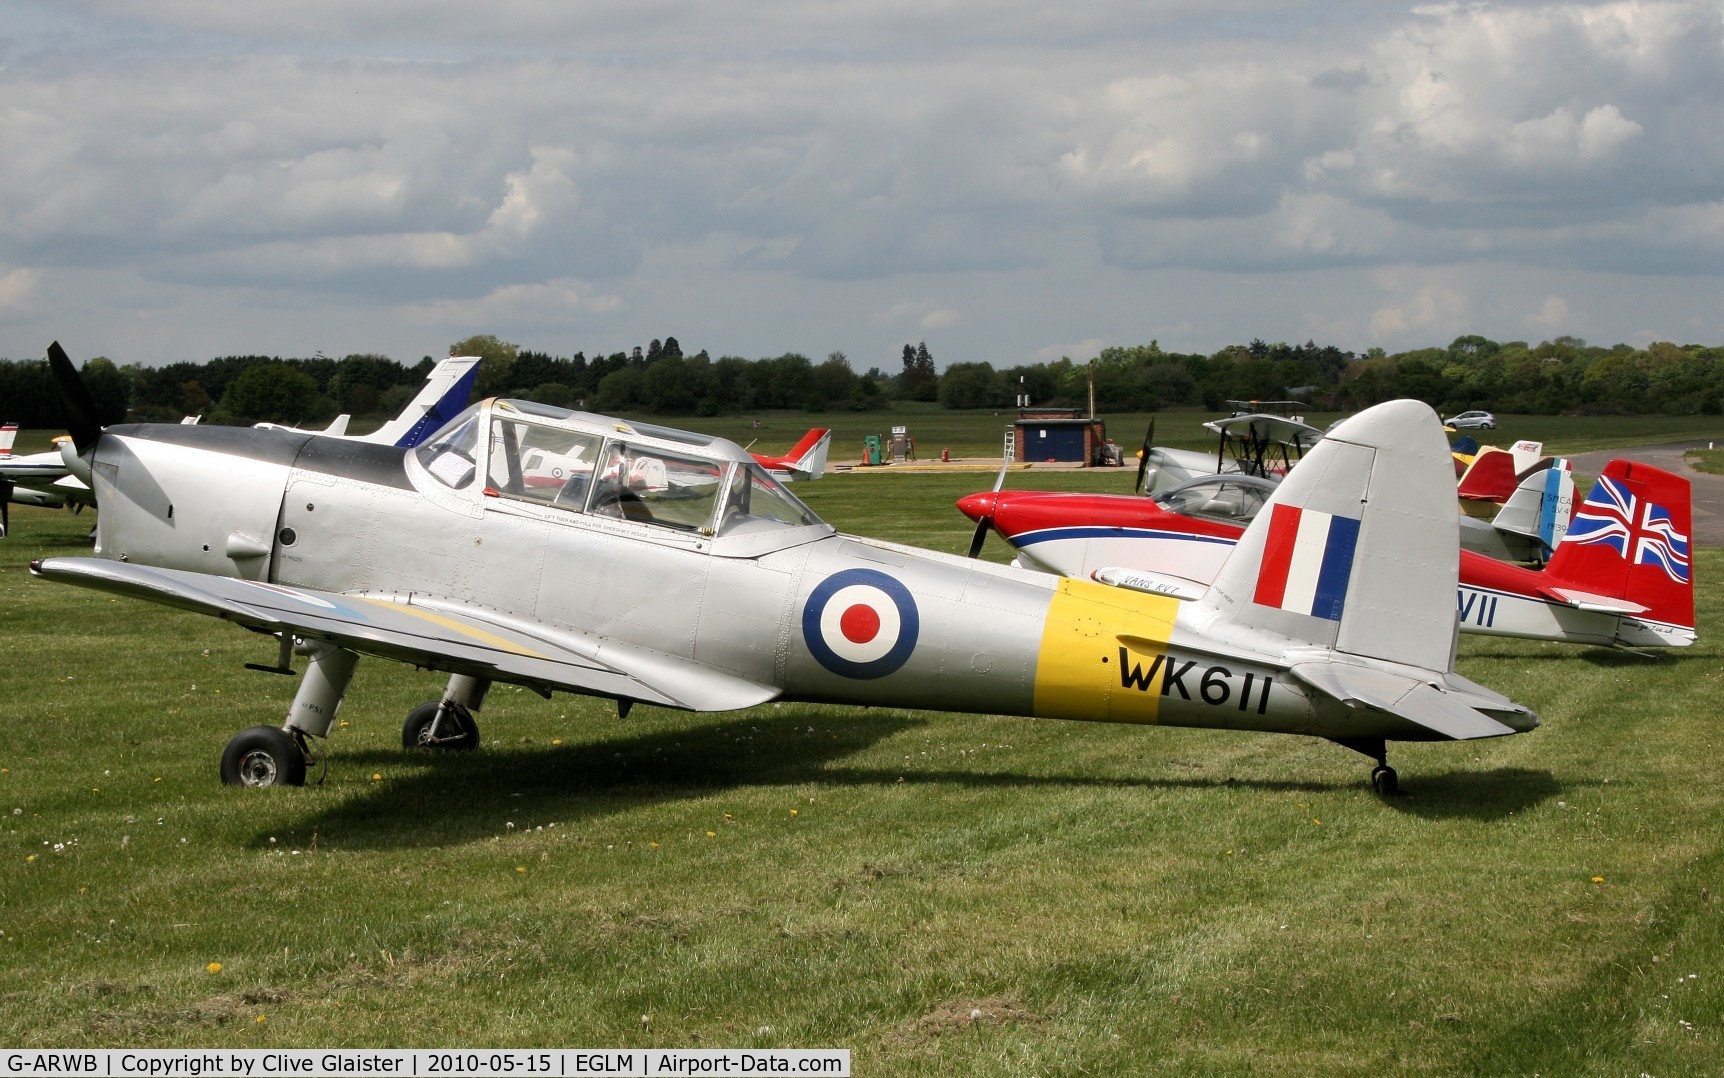 G-ARWB, 1952 De Havilland DHC-1 Chipmunk 22A C/N C1/0621, In the colours of the ROYAL AIR FORCE